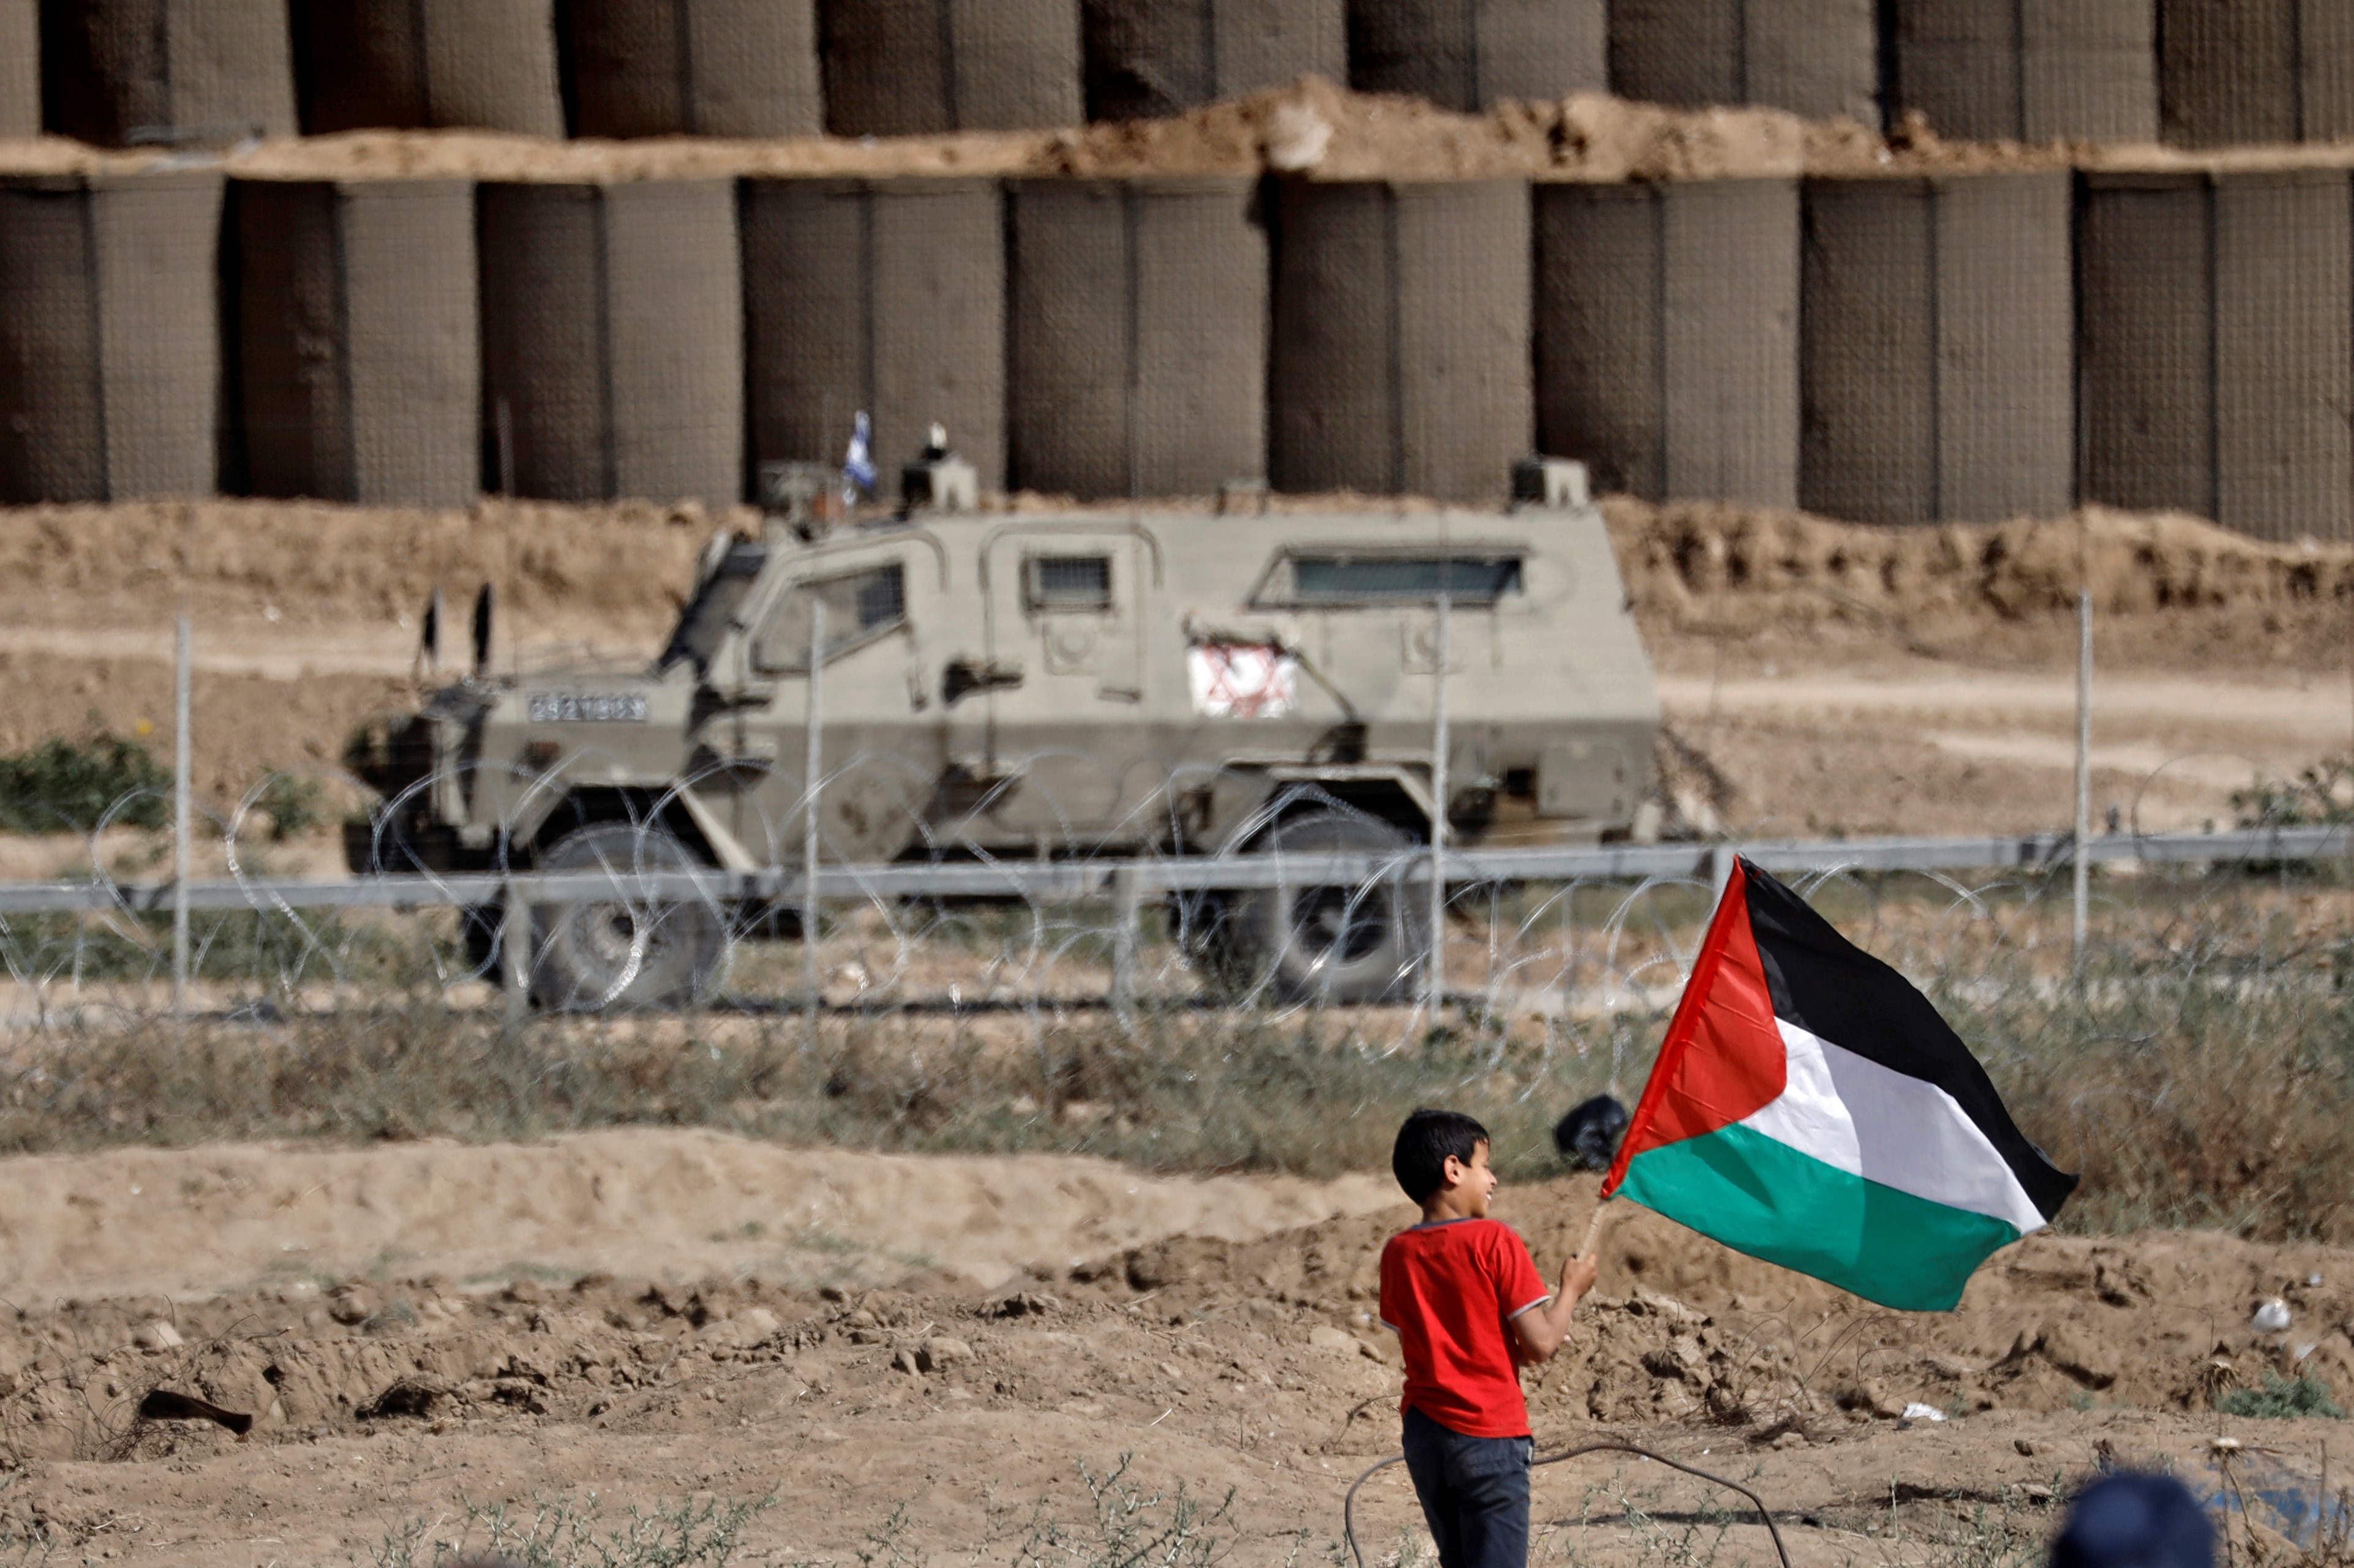 A Palestinian boy shows the national flag during clashes with Israeli forces following a protest marking the 71st anniversary of Nakba in El-Burej in the central Gaza Strip on 15 May (AFP)